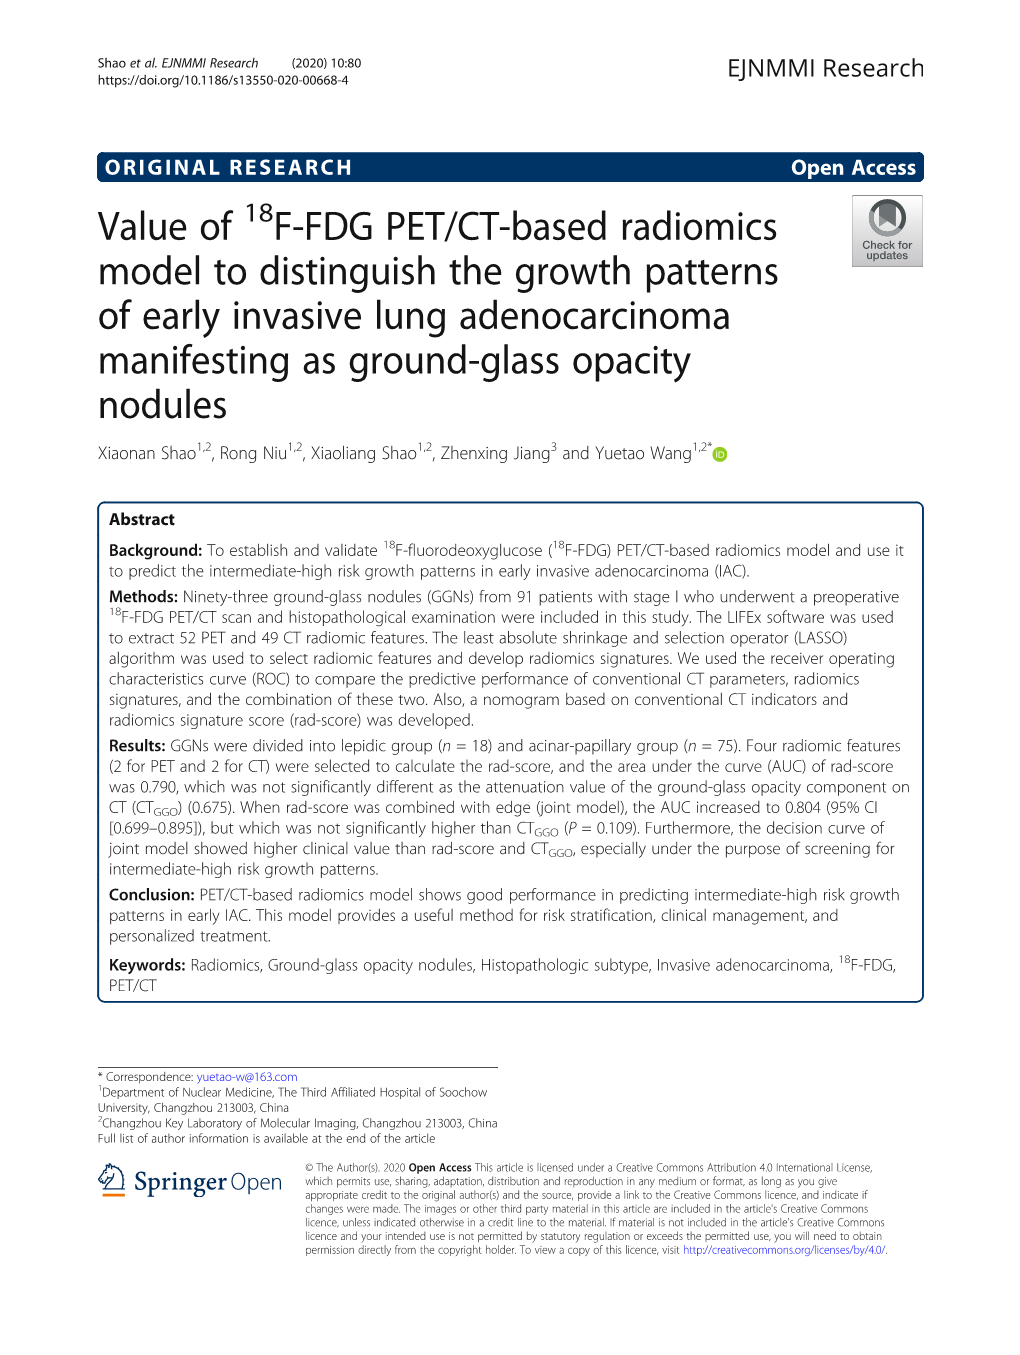 Value of 18F-FDG PET/CT-Based Radiomics Model to Distinguish the Growth Patterns of Early Invasive Lung Adenocarcinoma Manifesti